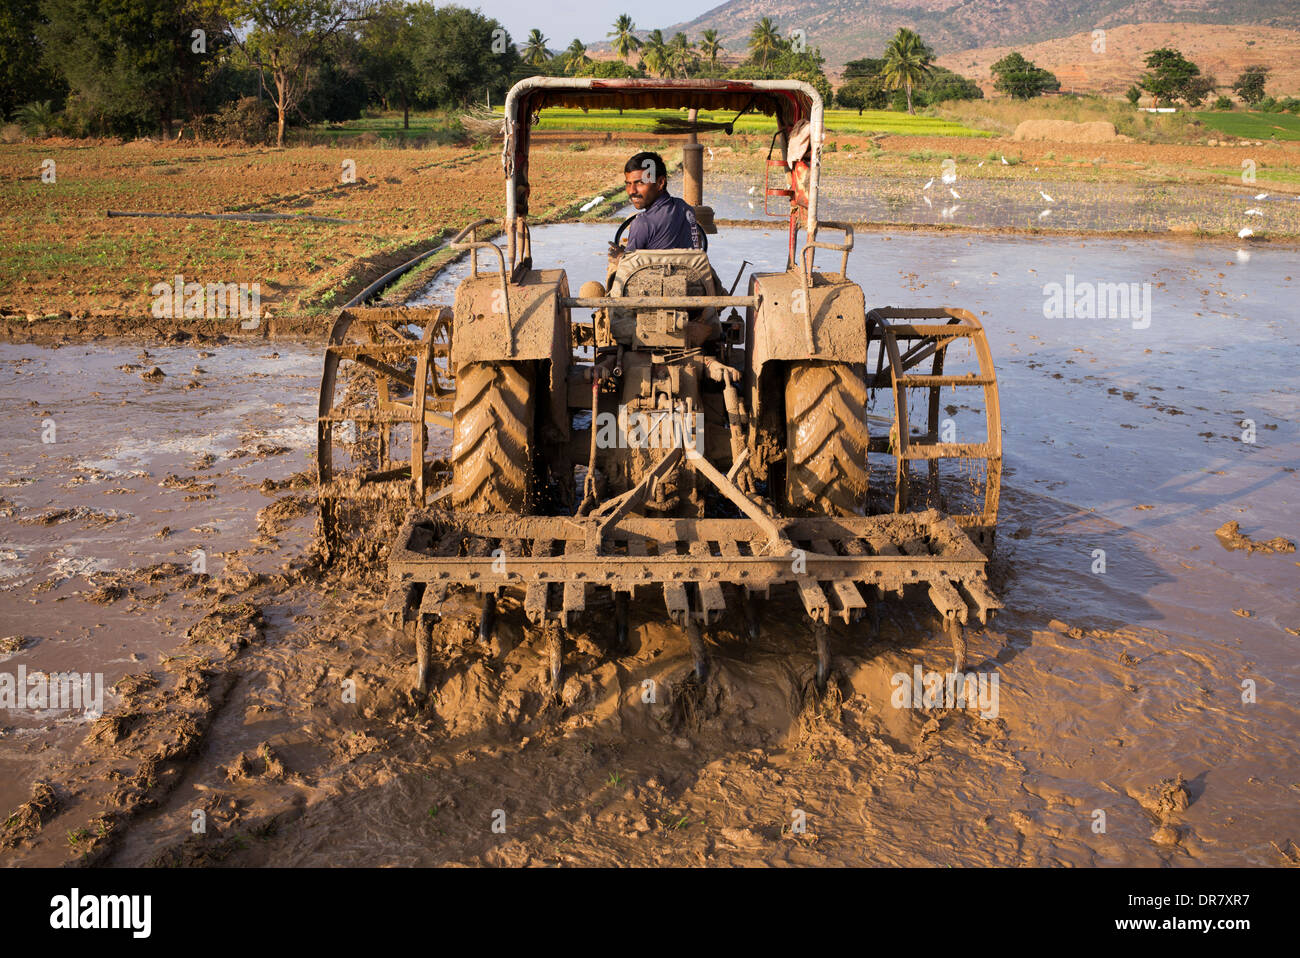 Indian man ploughing a rice paddy field with a tractor. Andhra Pradesh, India Stock Photo